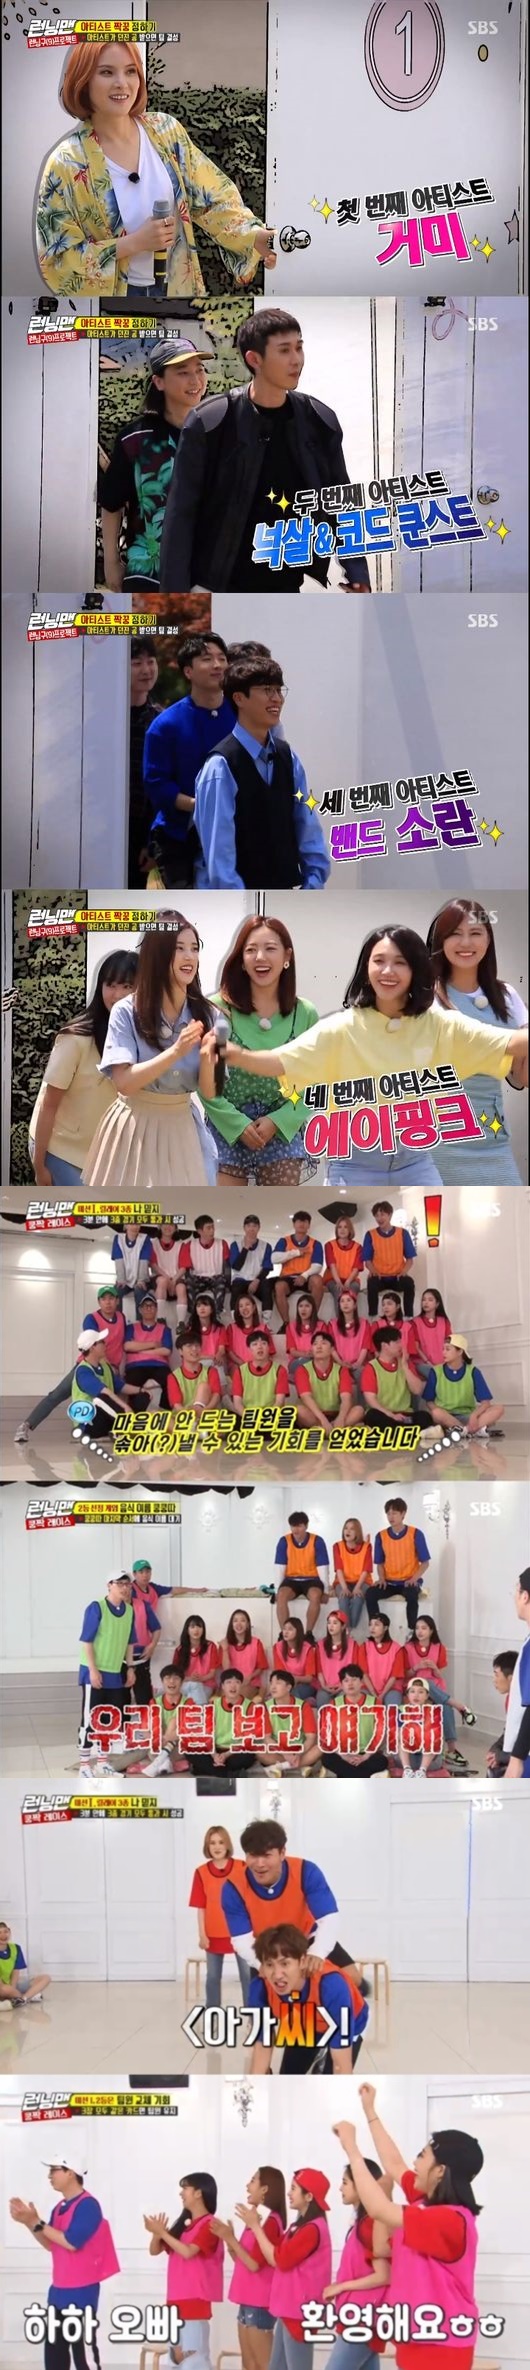 Running Man was noticed for unveiling the Collaboration The Artists to hold a domestic fan meeting for the 9th anniversary.According to Nielsen Korea, a ratings agency on July 8, SBS Running Man, which was broadcast on the 7th, had the highest audience rating per minute soared to 8.7%, and 2049 target audience rating, an important indicator of major advertising officials, recorded 4% (based on the second part of the audience rating of Seoul Capital Area households).This is the number one figure in the same time zone, surpassing the Masked King and the Donkey Ear.The average audience rating is 4.9% for the first part and 6.7% for the second part (based on the audience rating for the Seoul Capital Area households).The broadcast was made up of the Running Zone Project, and as previously announced, the top four artists who will hold a 9th anniversary domestic fan meeting with the members were unveiled.The Artist 1 team and two members had to be paired, and the OST Queen spider first appeared, paired with Kim Jong-kook and Lee Kwang-soo.Nunsal & Cod Kunst was in close contact with Song Ji-hyo X Haha, and the band disturbance was paired with Yoo Jae-Suk X Jeon So-min and girl group Apink with Ji Suk-jin X Yang Se-chan.In particular, Nucksal and Song Ji-hyo made a bigger smile as they became a hot topic with resemblance.With the first pair set, it was decorated with a kung-kak race that takes place in a total of three rounds.The final team was able to stand on stage as a collaboration team, and all teams played a confrontation without concessions.In the first showdown, the spider X Kim Jong-kook X Lee Kwang-soo team took first place and did not change the team member, but the second-ranked Apink X Ji Suk-jin X Yang Se-chan team did not agree.Eventually, Yoo Jae-Suk X Haha was paired with Apink, and the scene was the best one minute with a highest audience rating of 8.7%.pear hyo-ju